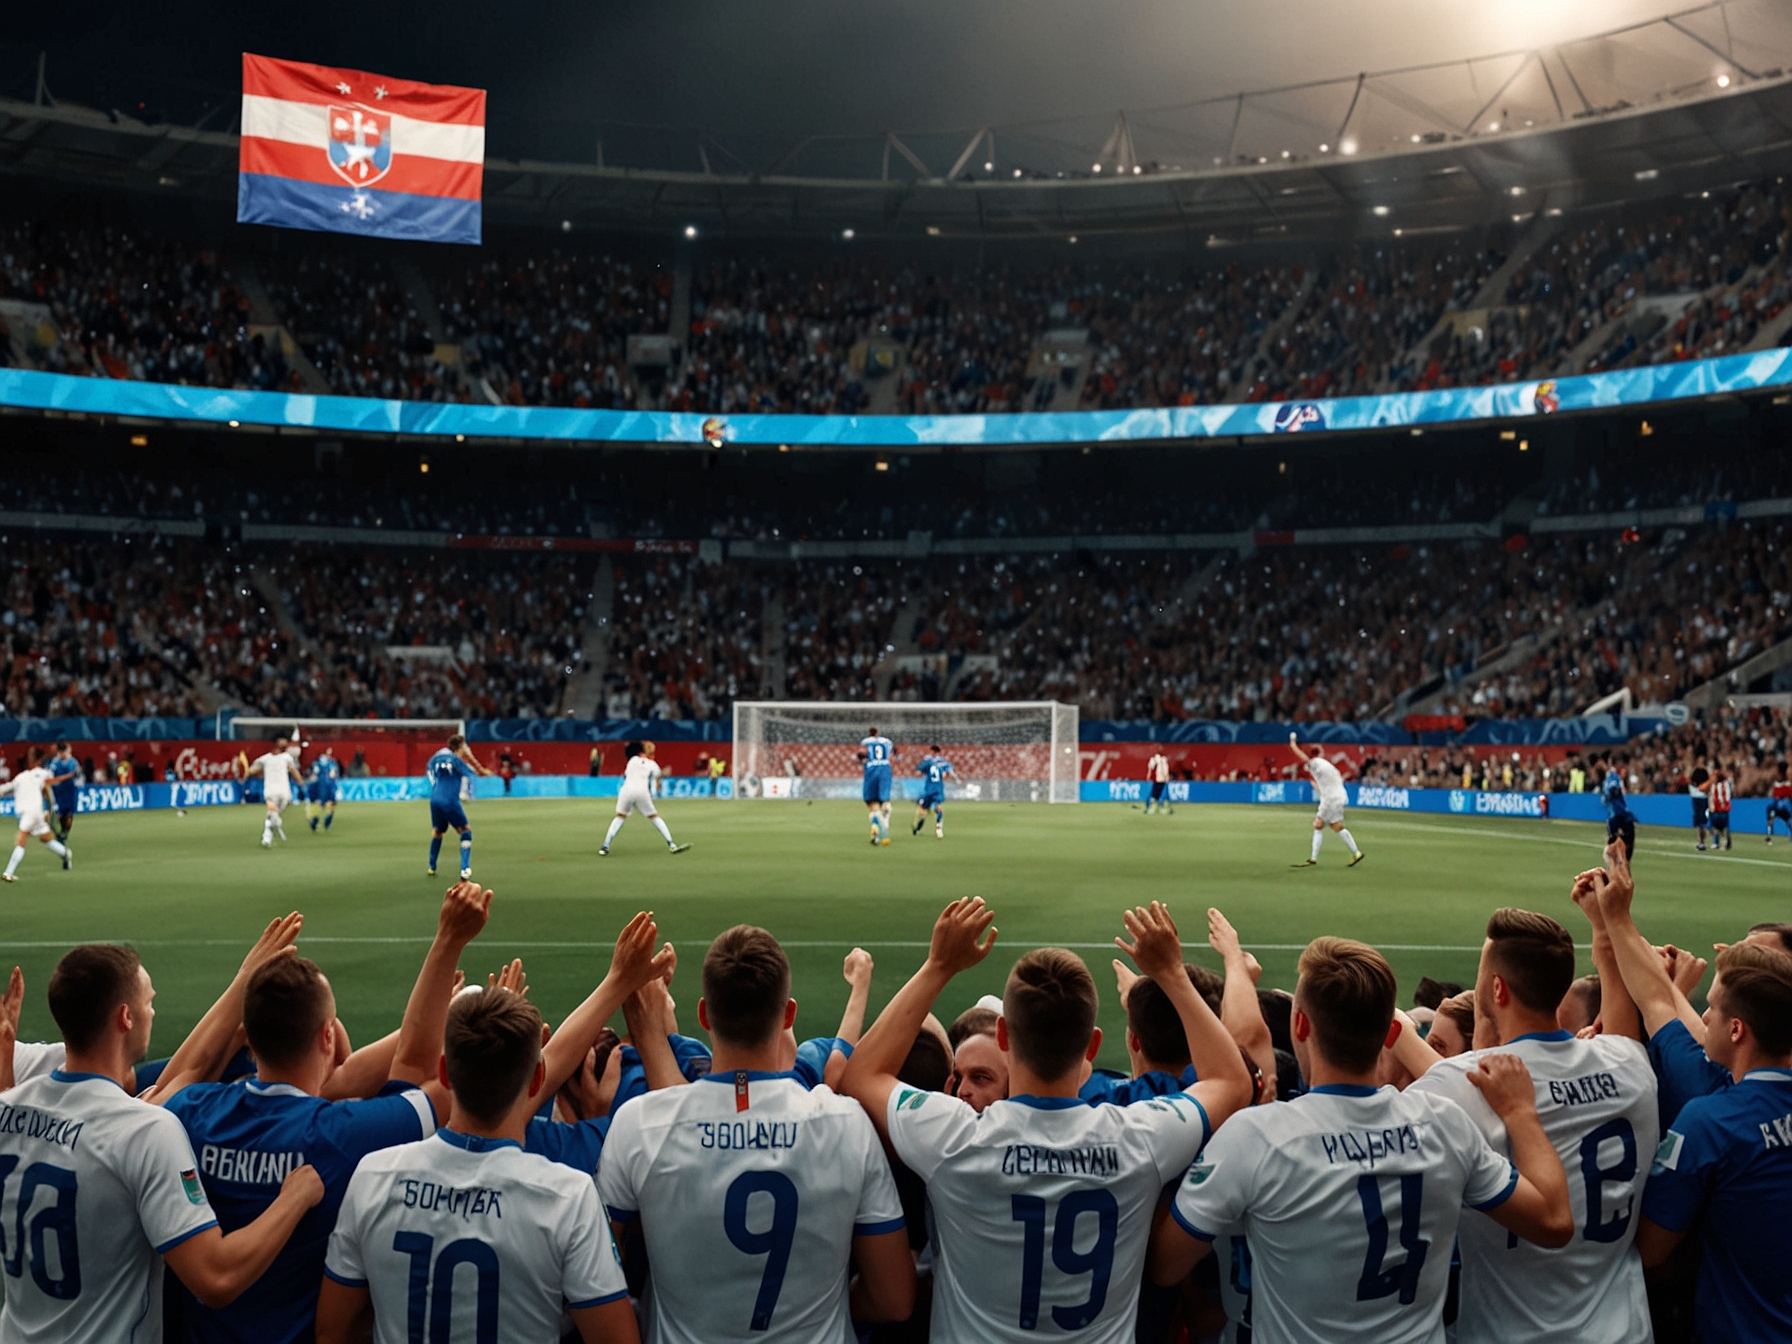 Slovakia scores their opening goal with a powerful header in the 55th minute, captured amid a sea of cheering fans and celebrating players in their classic white and blue kits.